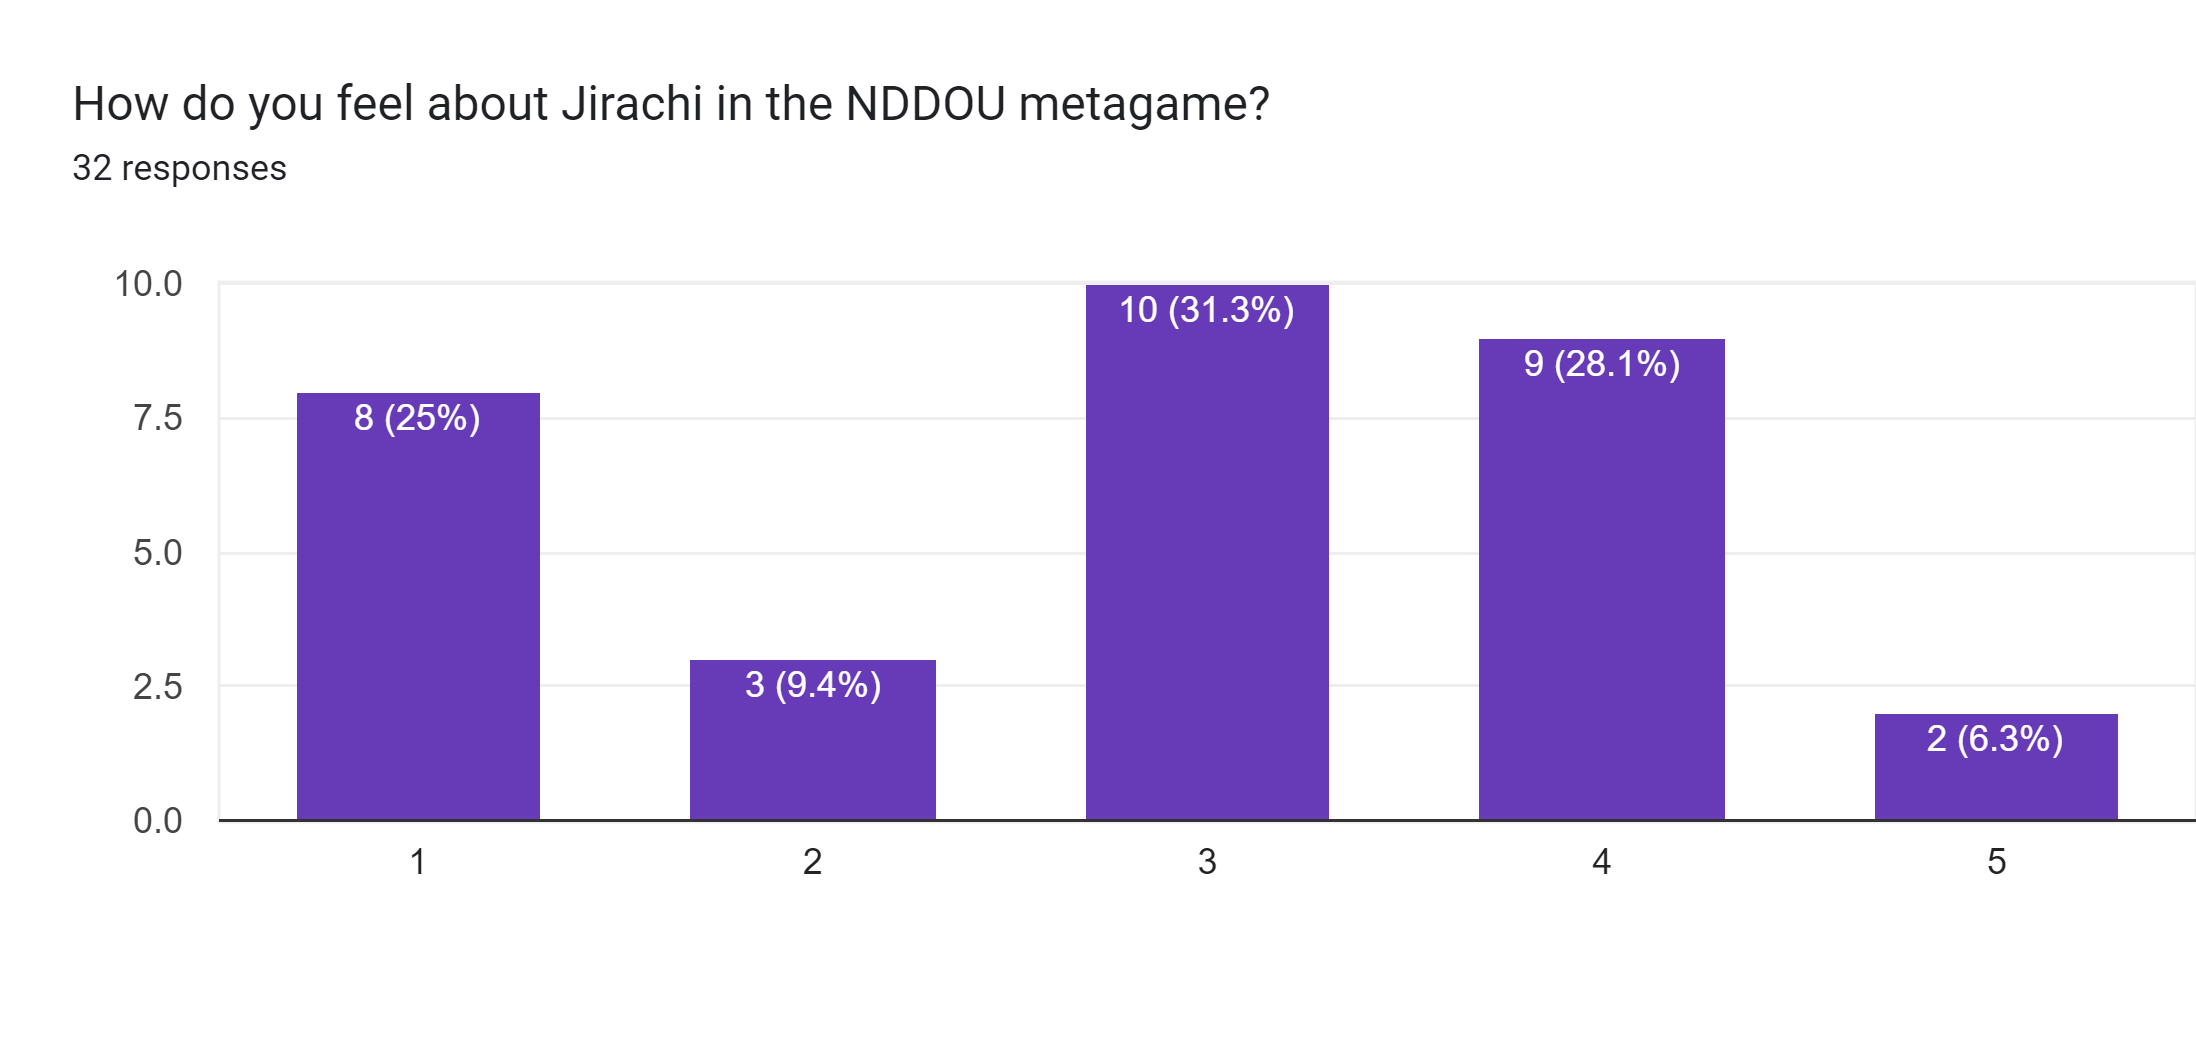 Forms response chart. Question title: How do you feel about Jirachi in the NDDOU metagame?. Number of responses: 32 responses.